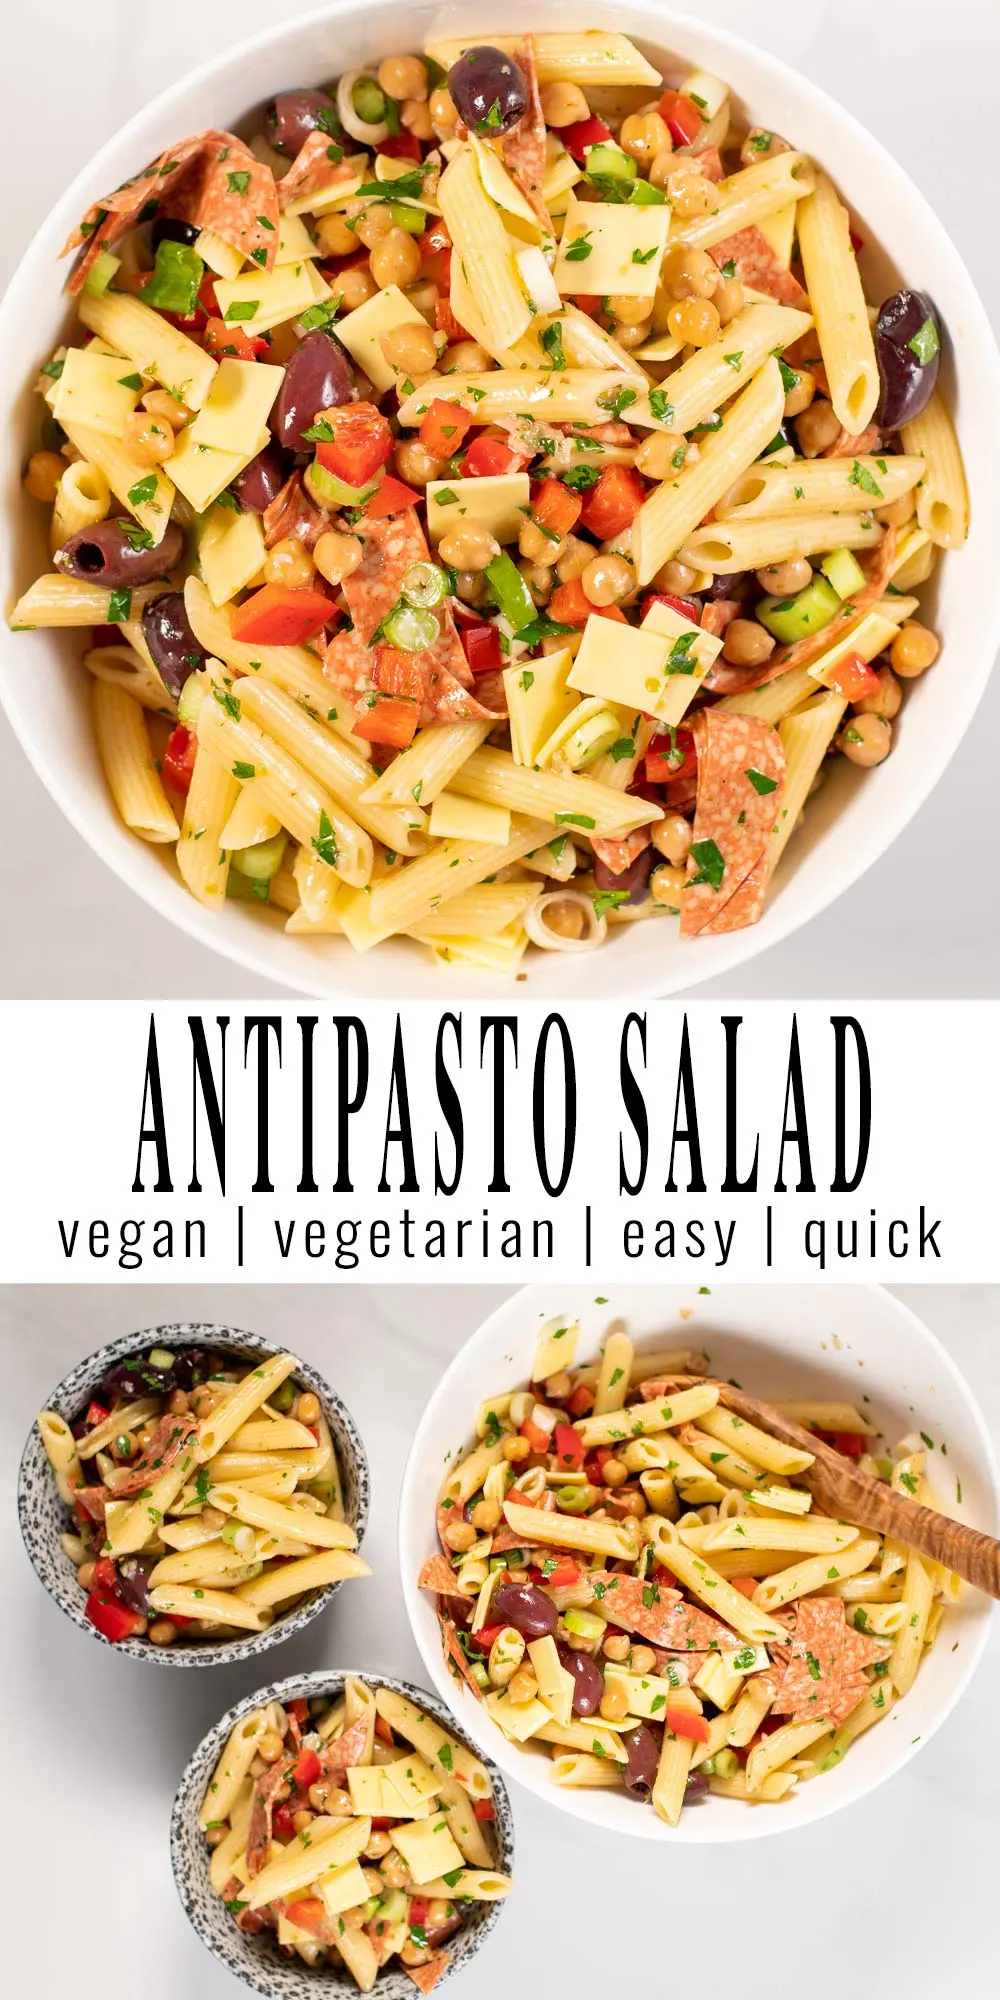 Collage of two photos of Antipasto Salad with recipe title text.